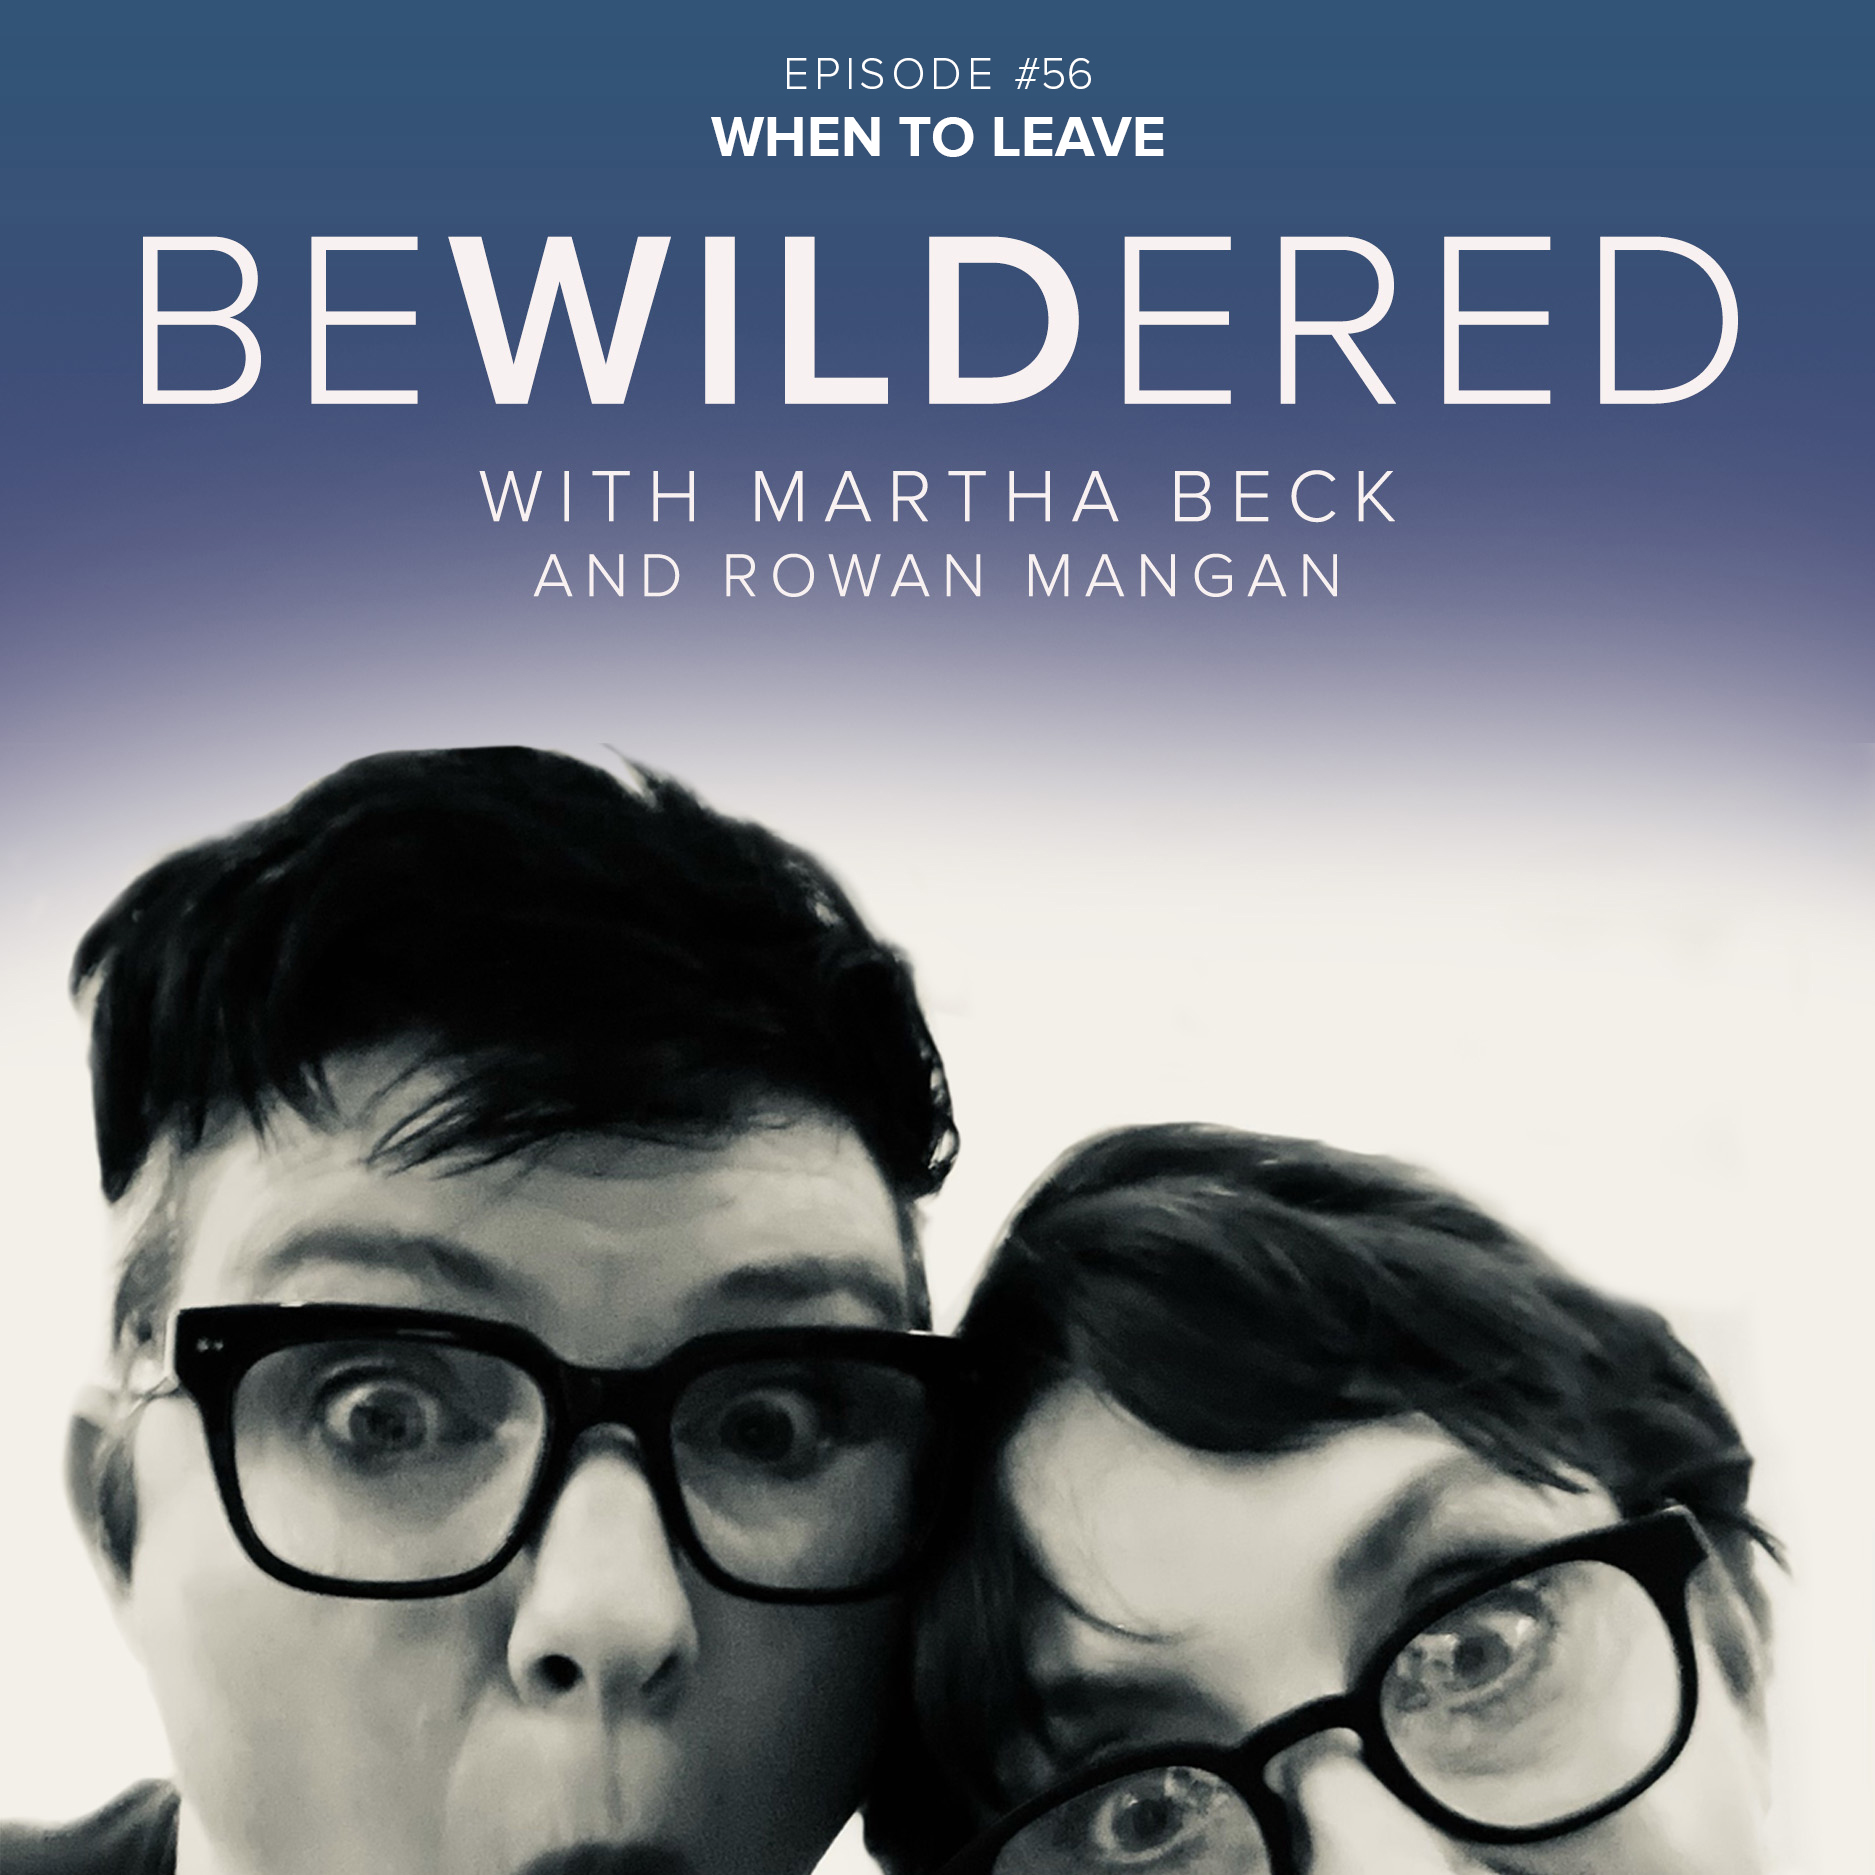 Image for Episode #56 When to Leave for the Bewildered Podcast with Martha Beck and Rowan Mangan